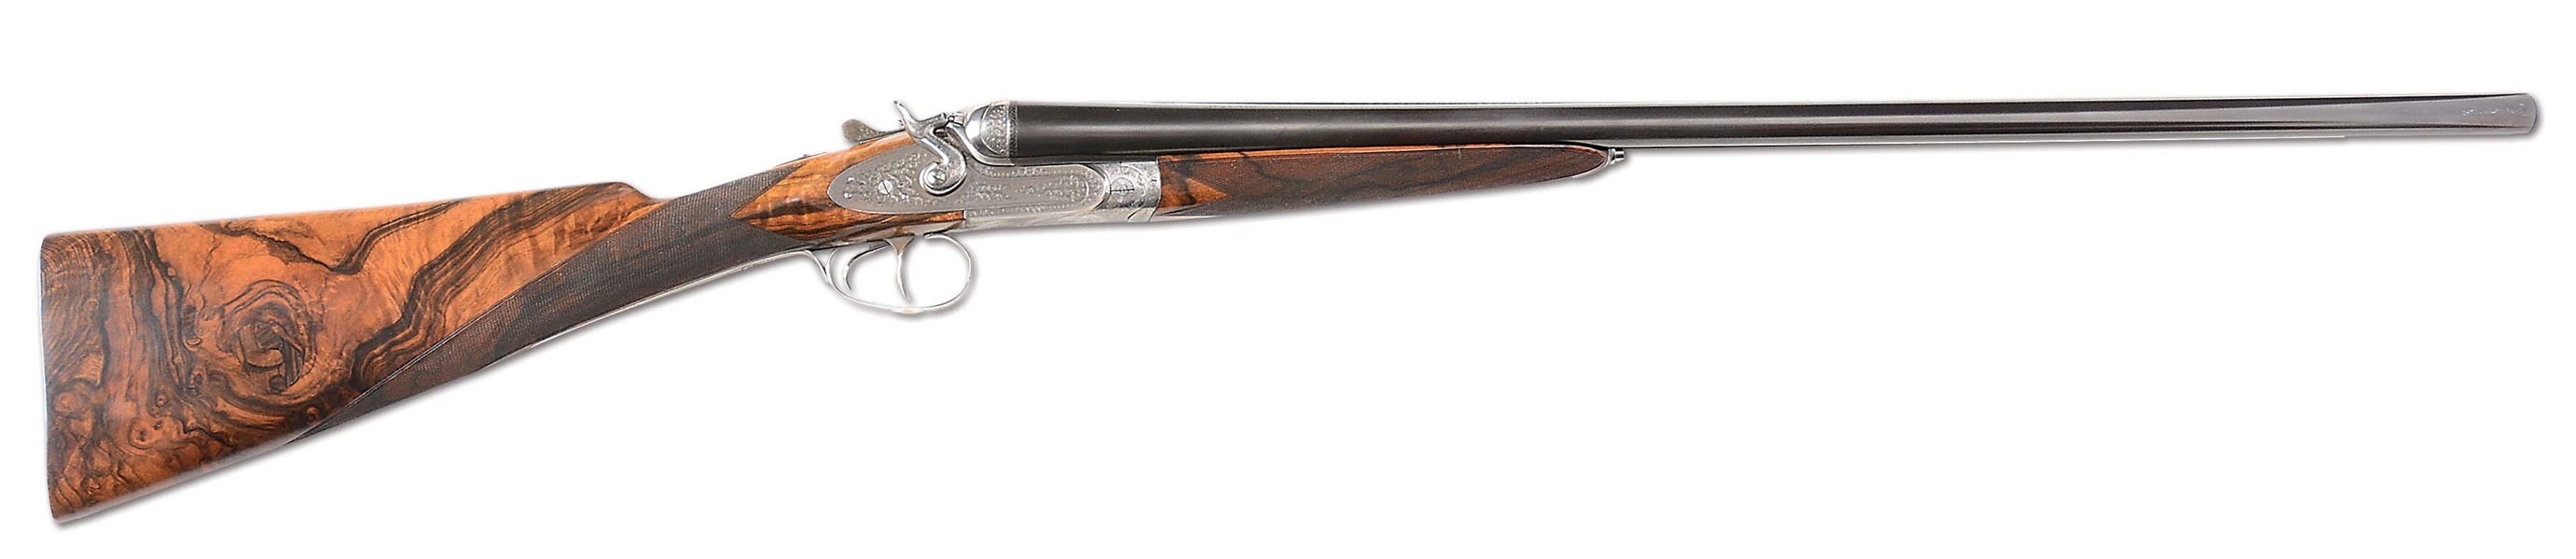 (M) S. LUCCHINI SELF-COCKING EJECTOR DOUBLE HAMMER SHOTGUN WITH CASE, RETAILED BY NEW ENGLAND ARMS CO.